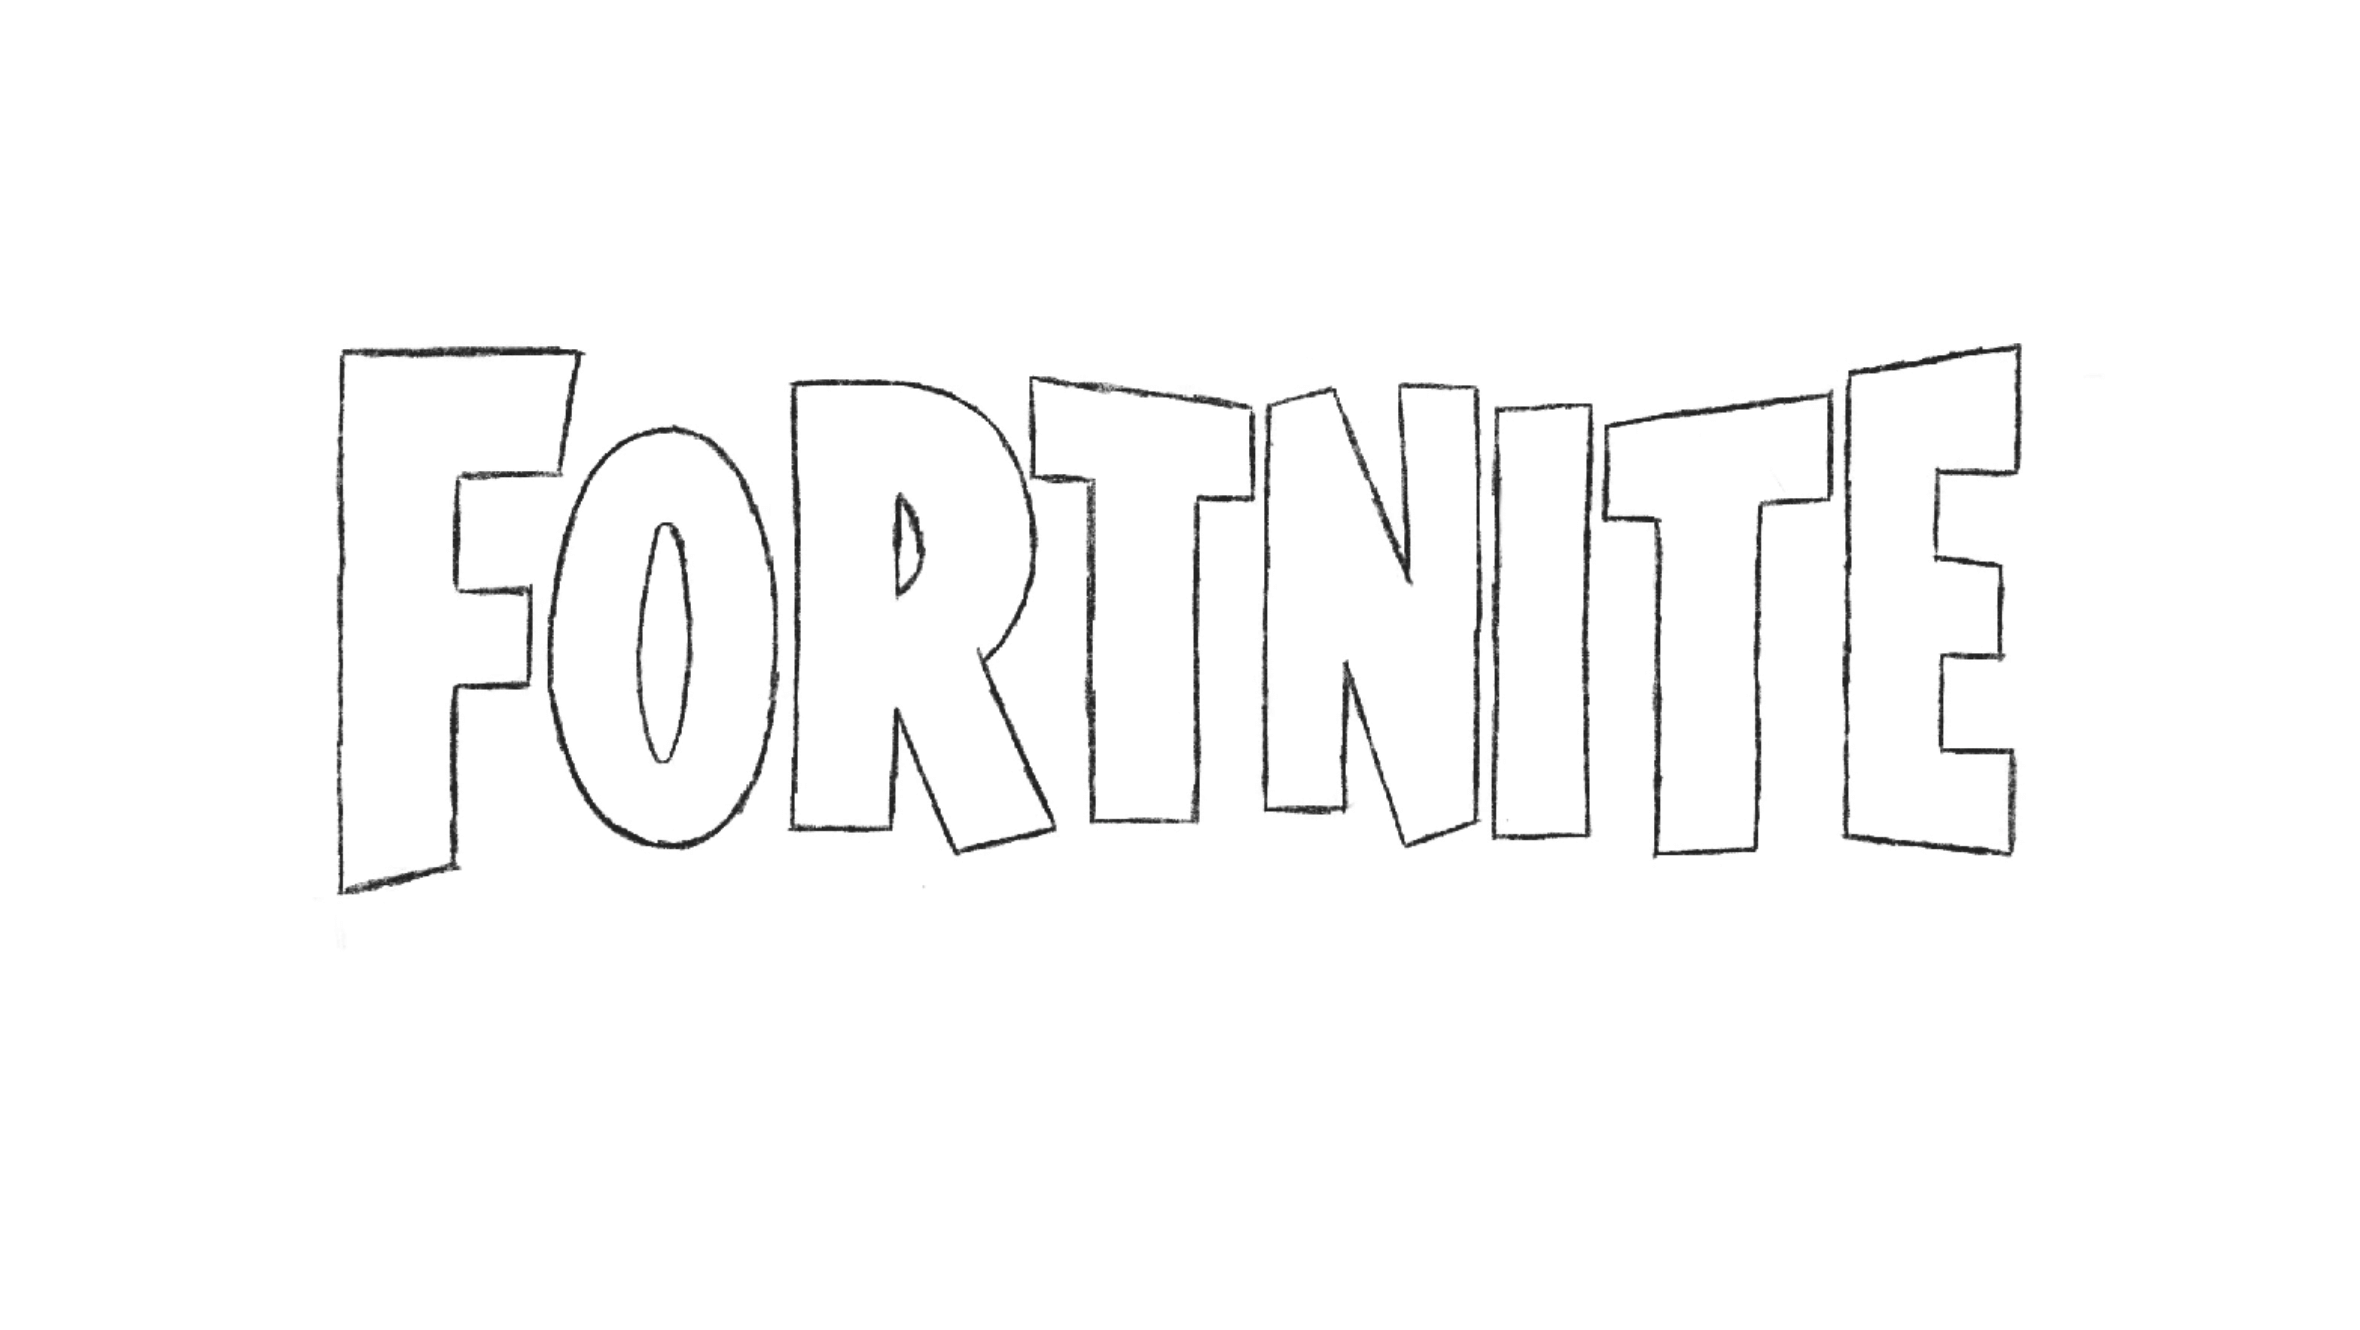 Step 5 of drawing the Fortnite logo: Erase the outlines